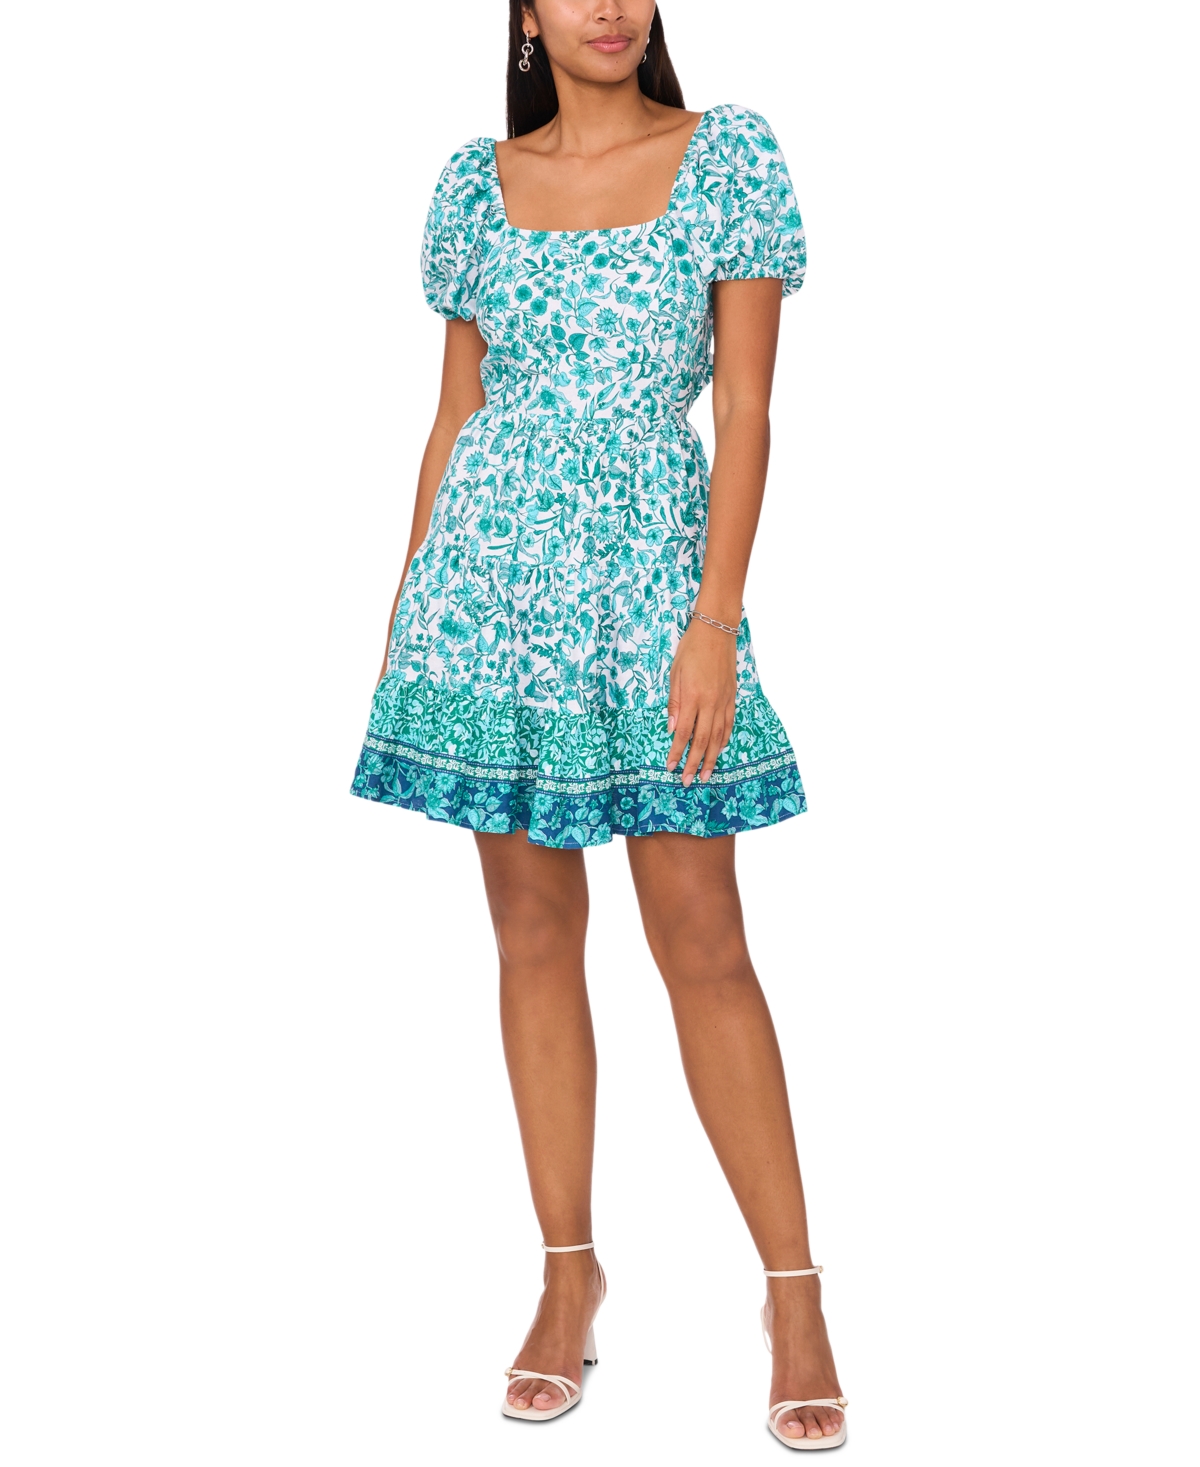 Women's Printed Tie-Back Fit & Flare Dress - White/teal